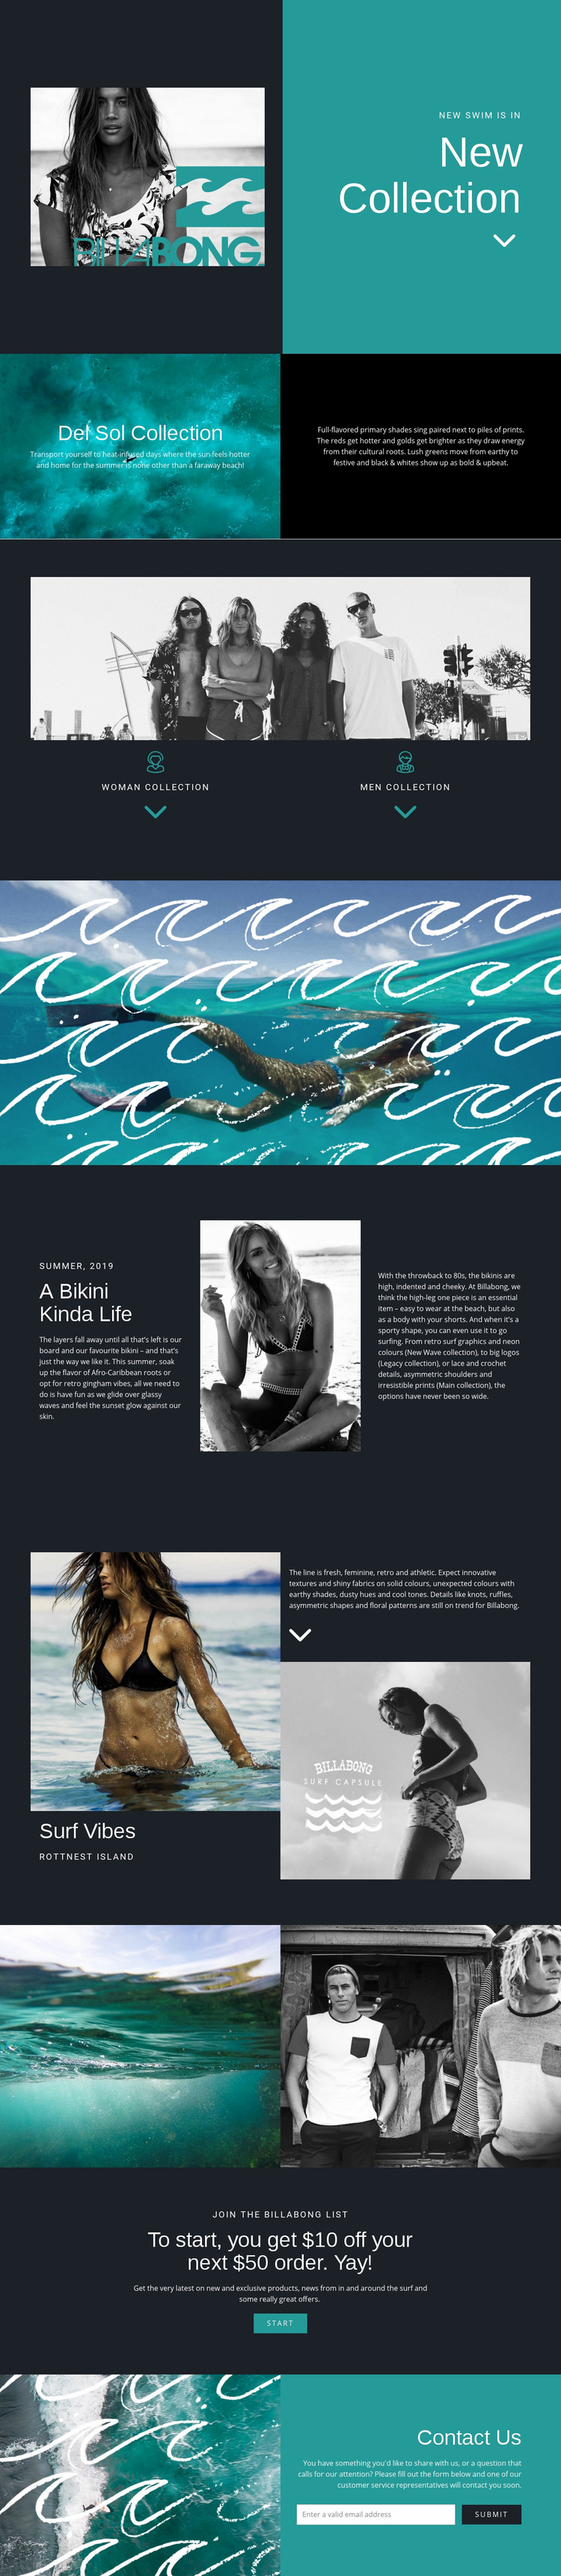 New collection of swimwear Web Page Design